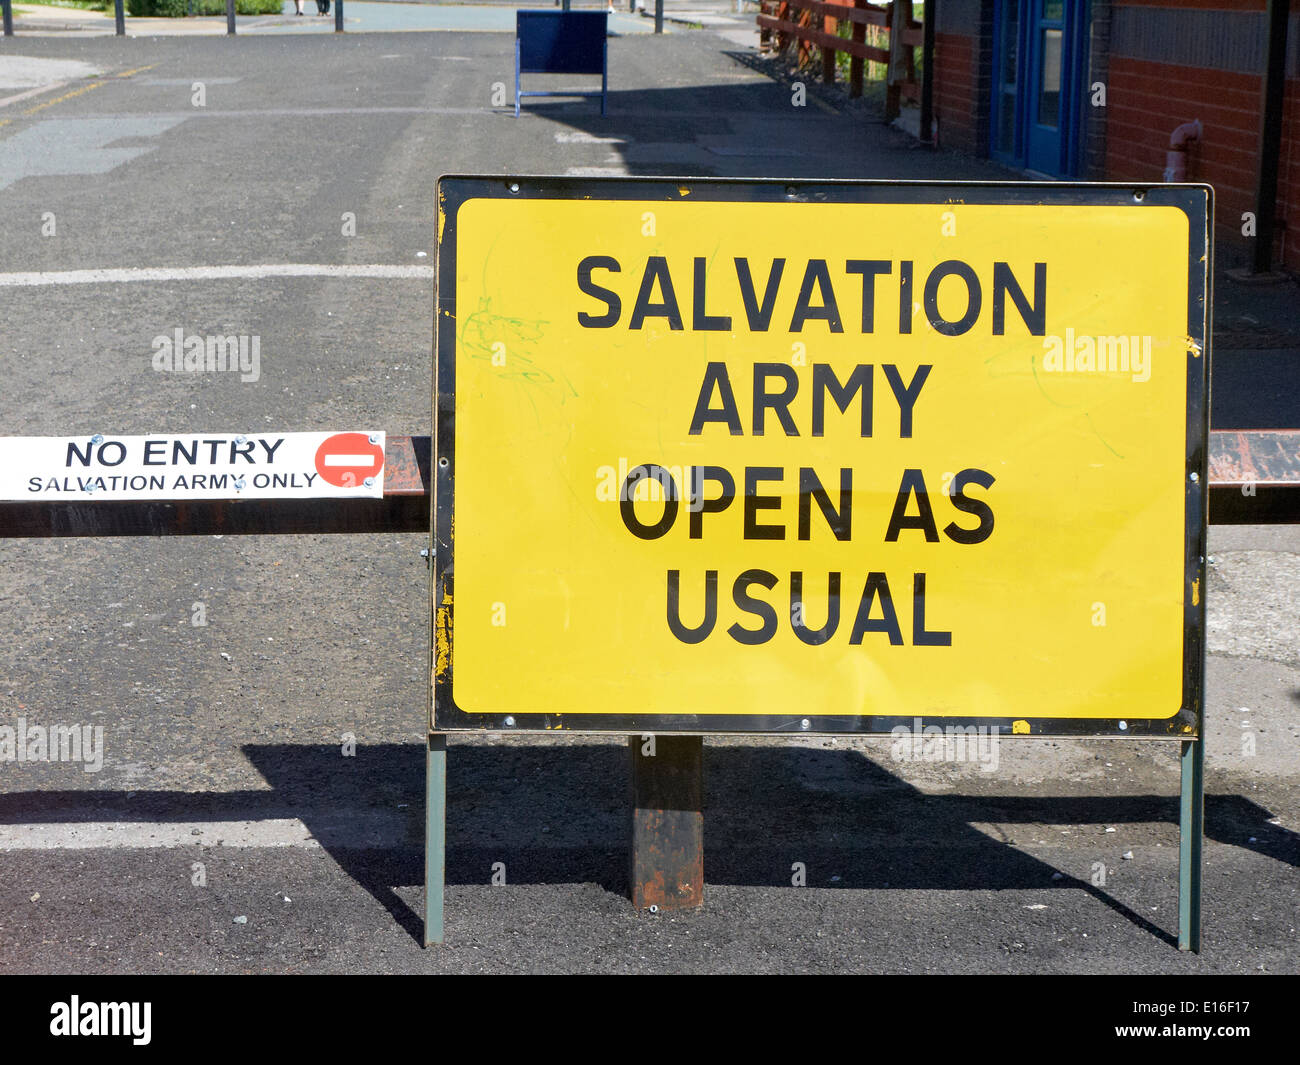 Salvation Army open as usual sign UK Stock Photo